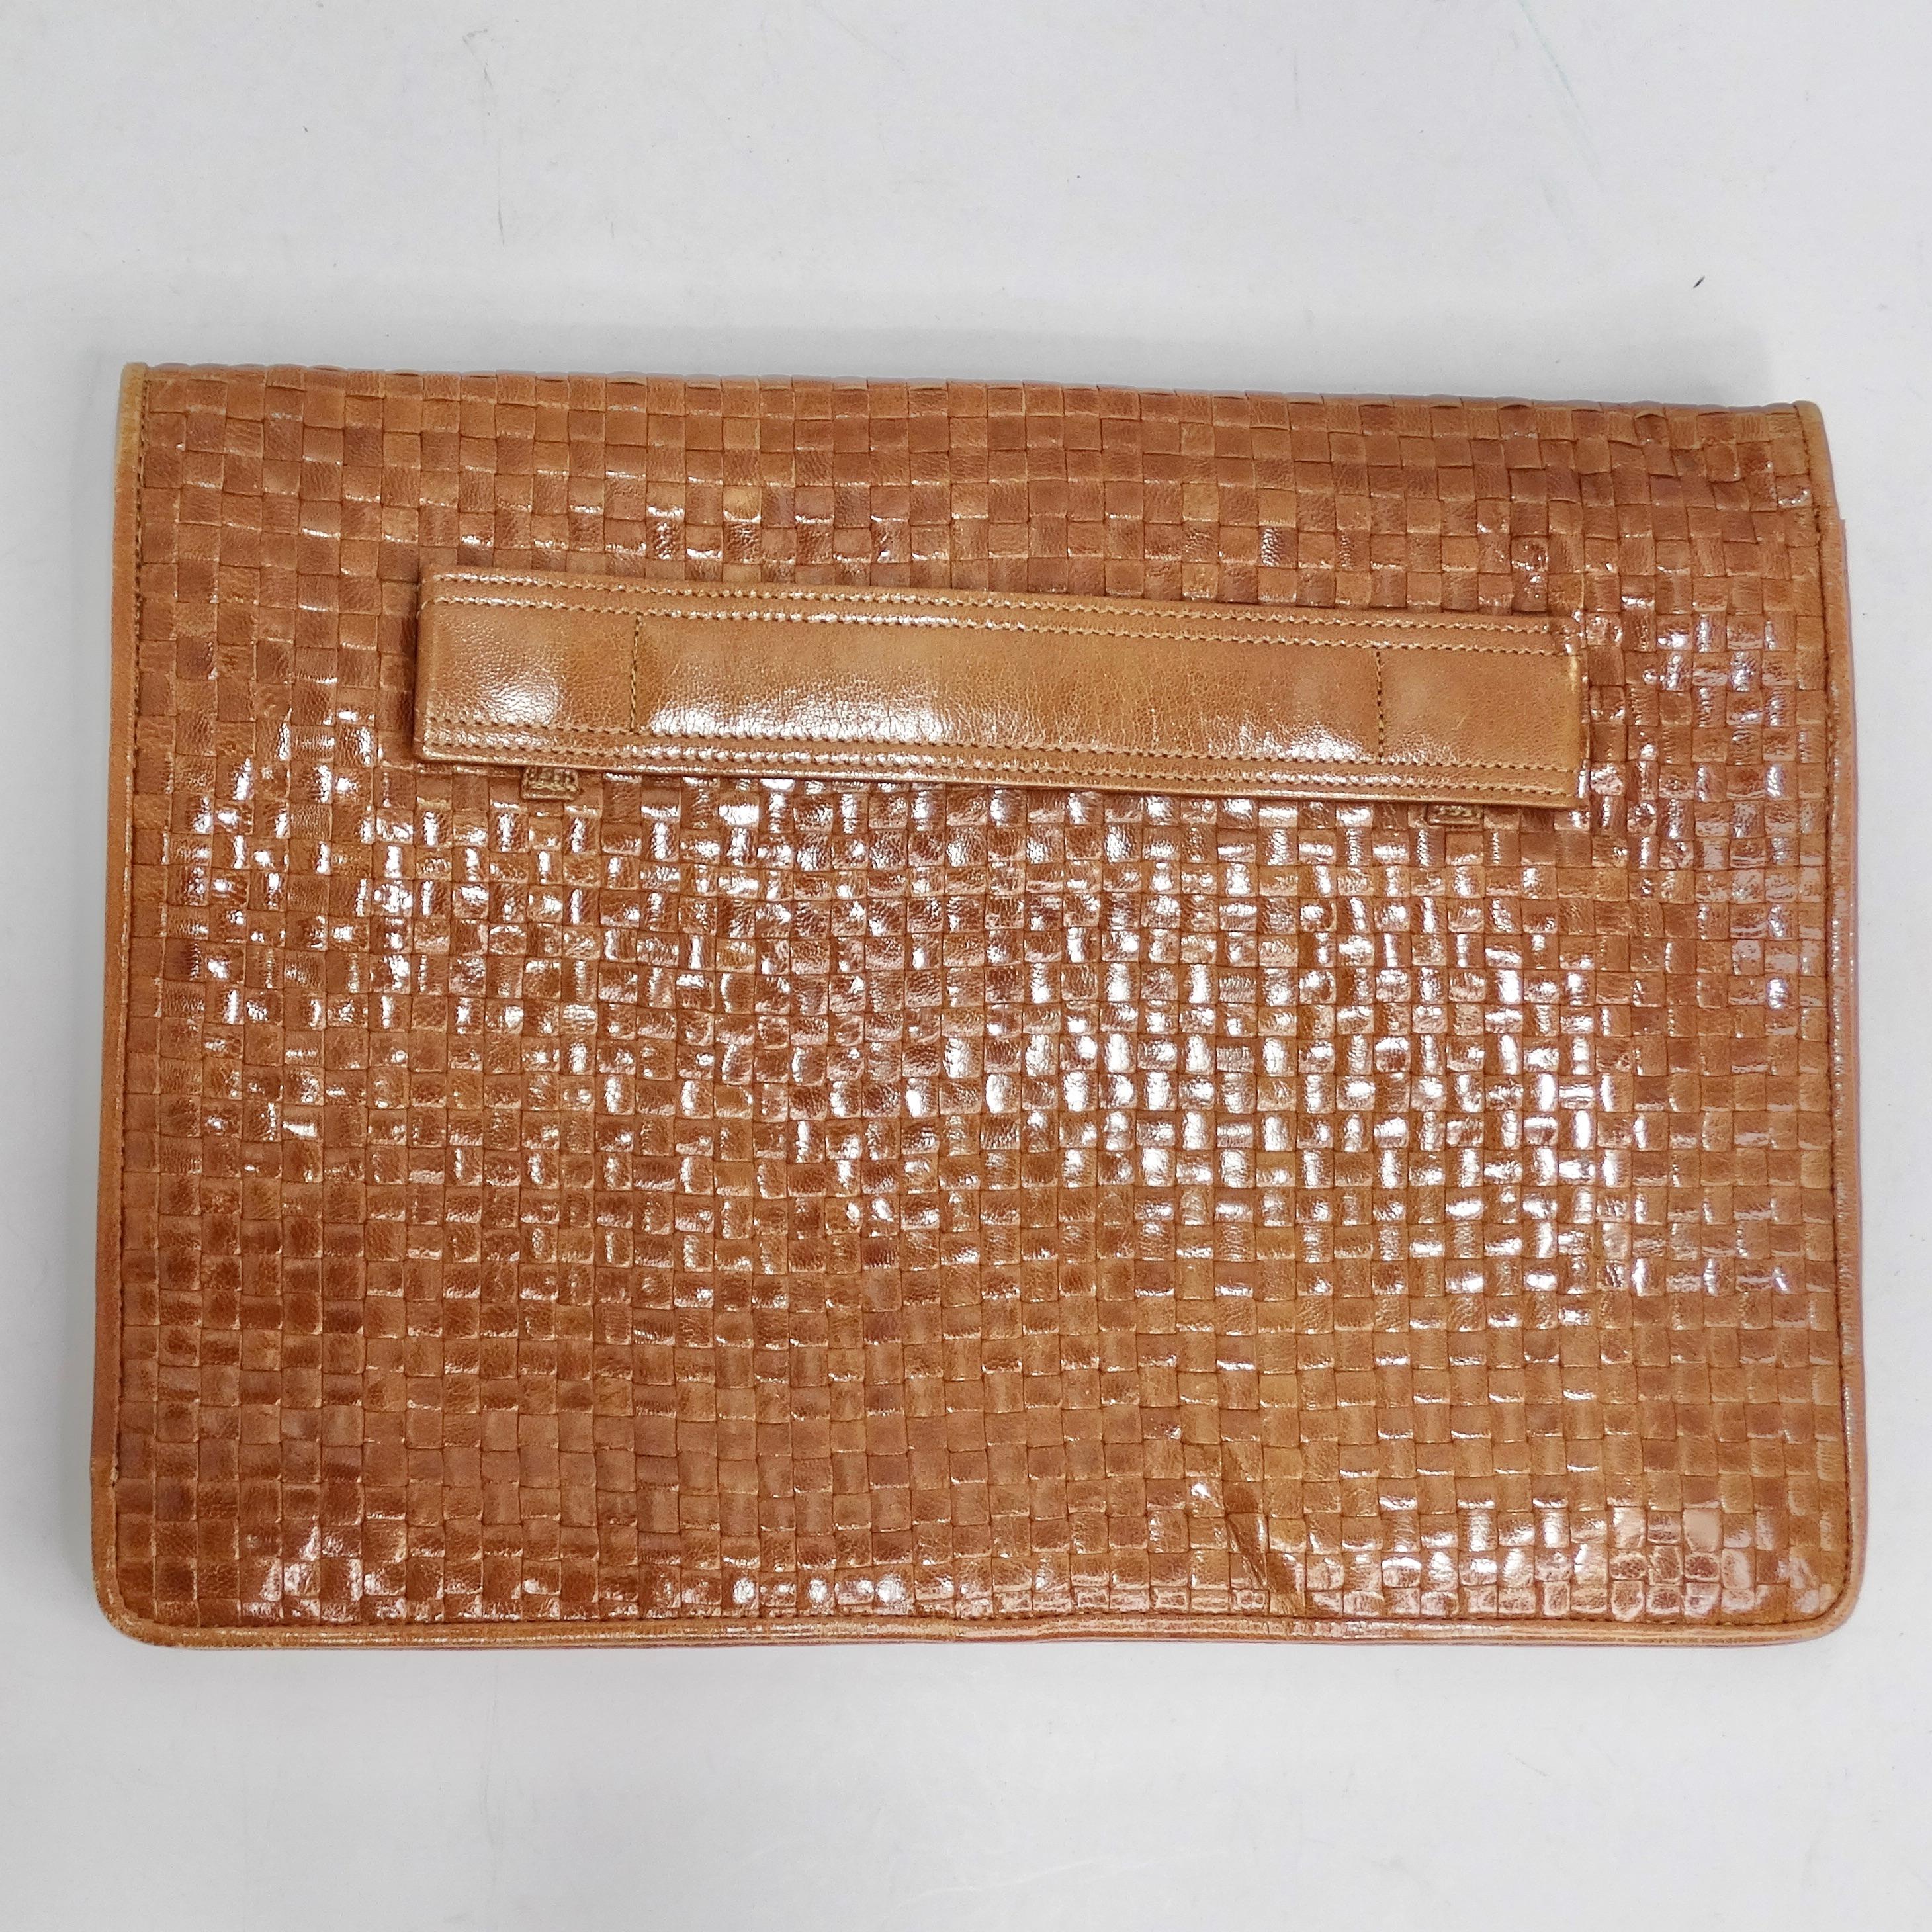 Fendi Brown Leather Woven Clutch In Excellent Condition For Sale In Scottsdale, AZ